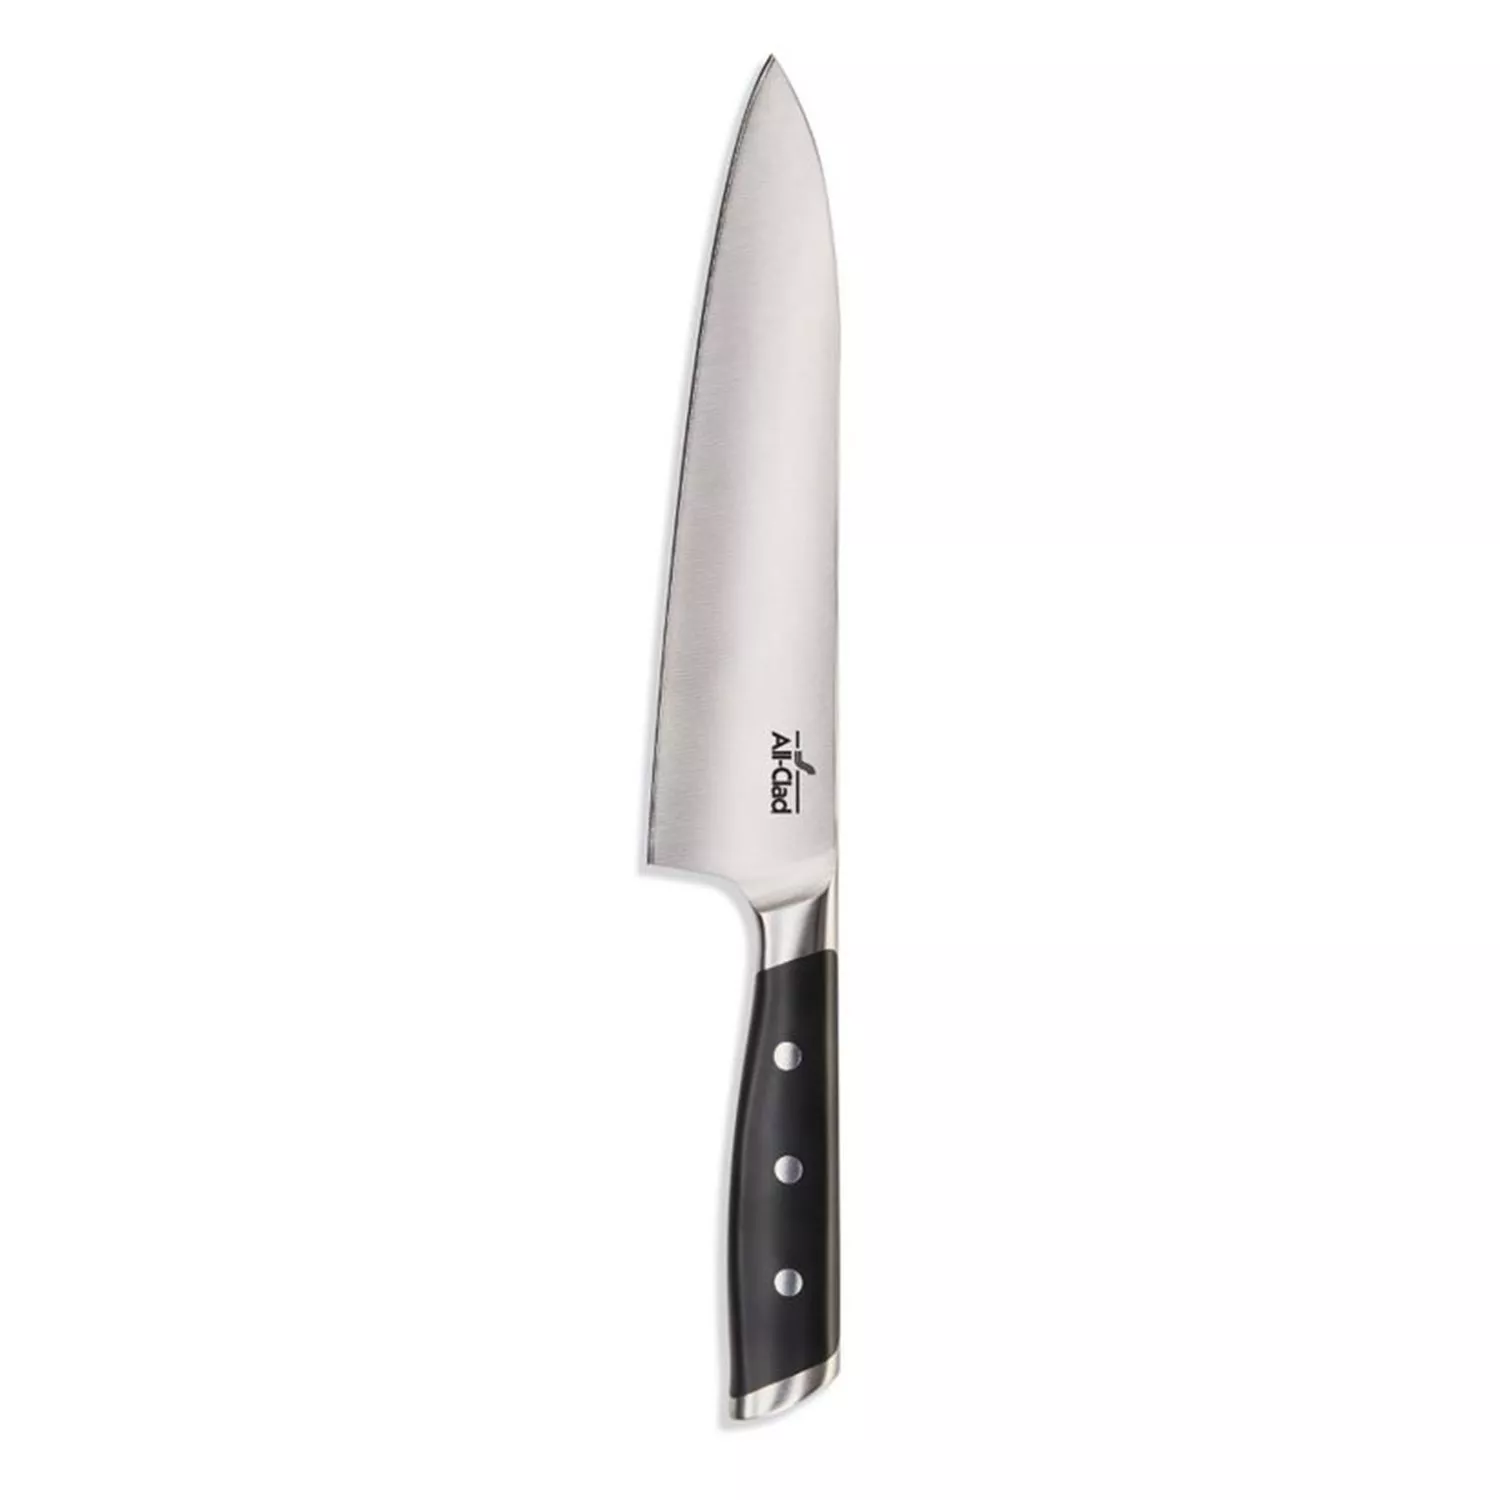 All-Clad Forged Chef’s Knife, 8"